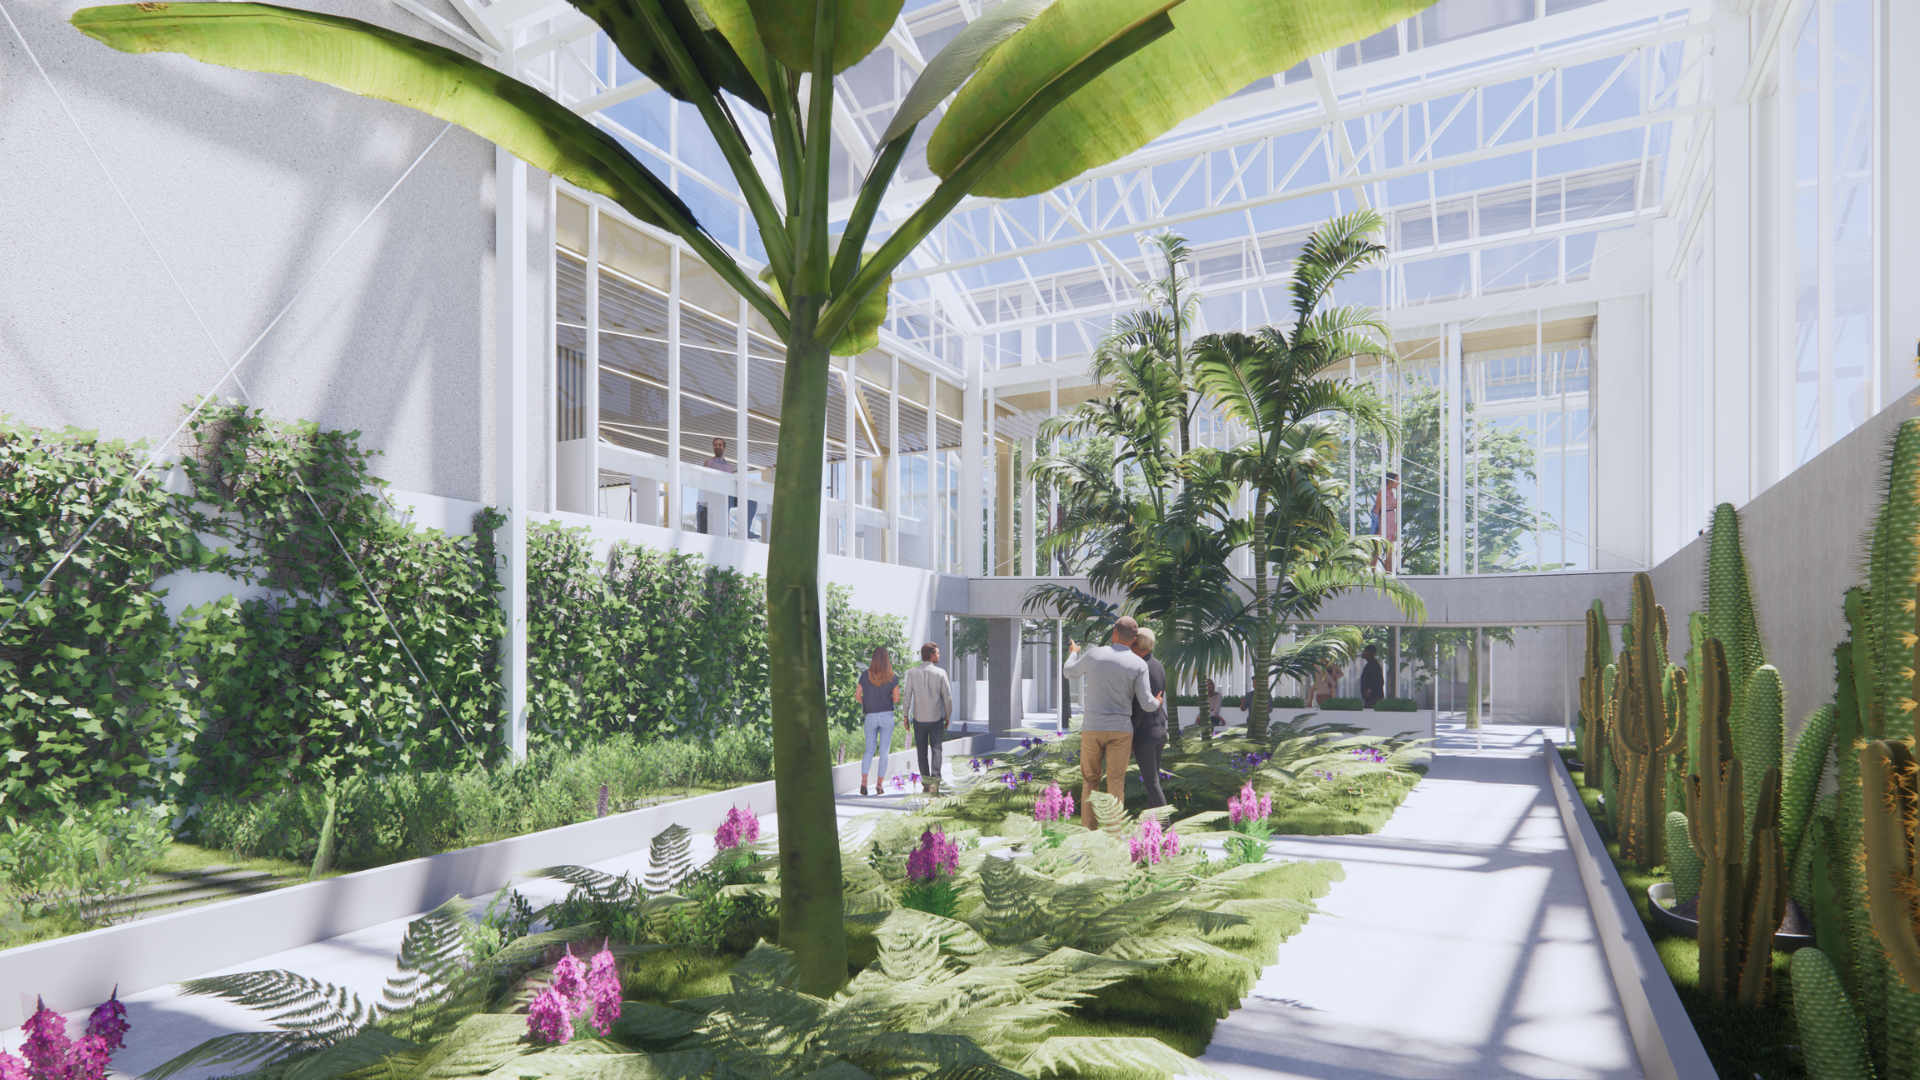 An artist's rendering of the interior of a greenhouse